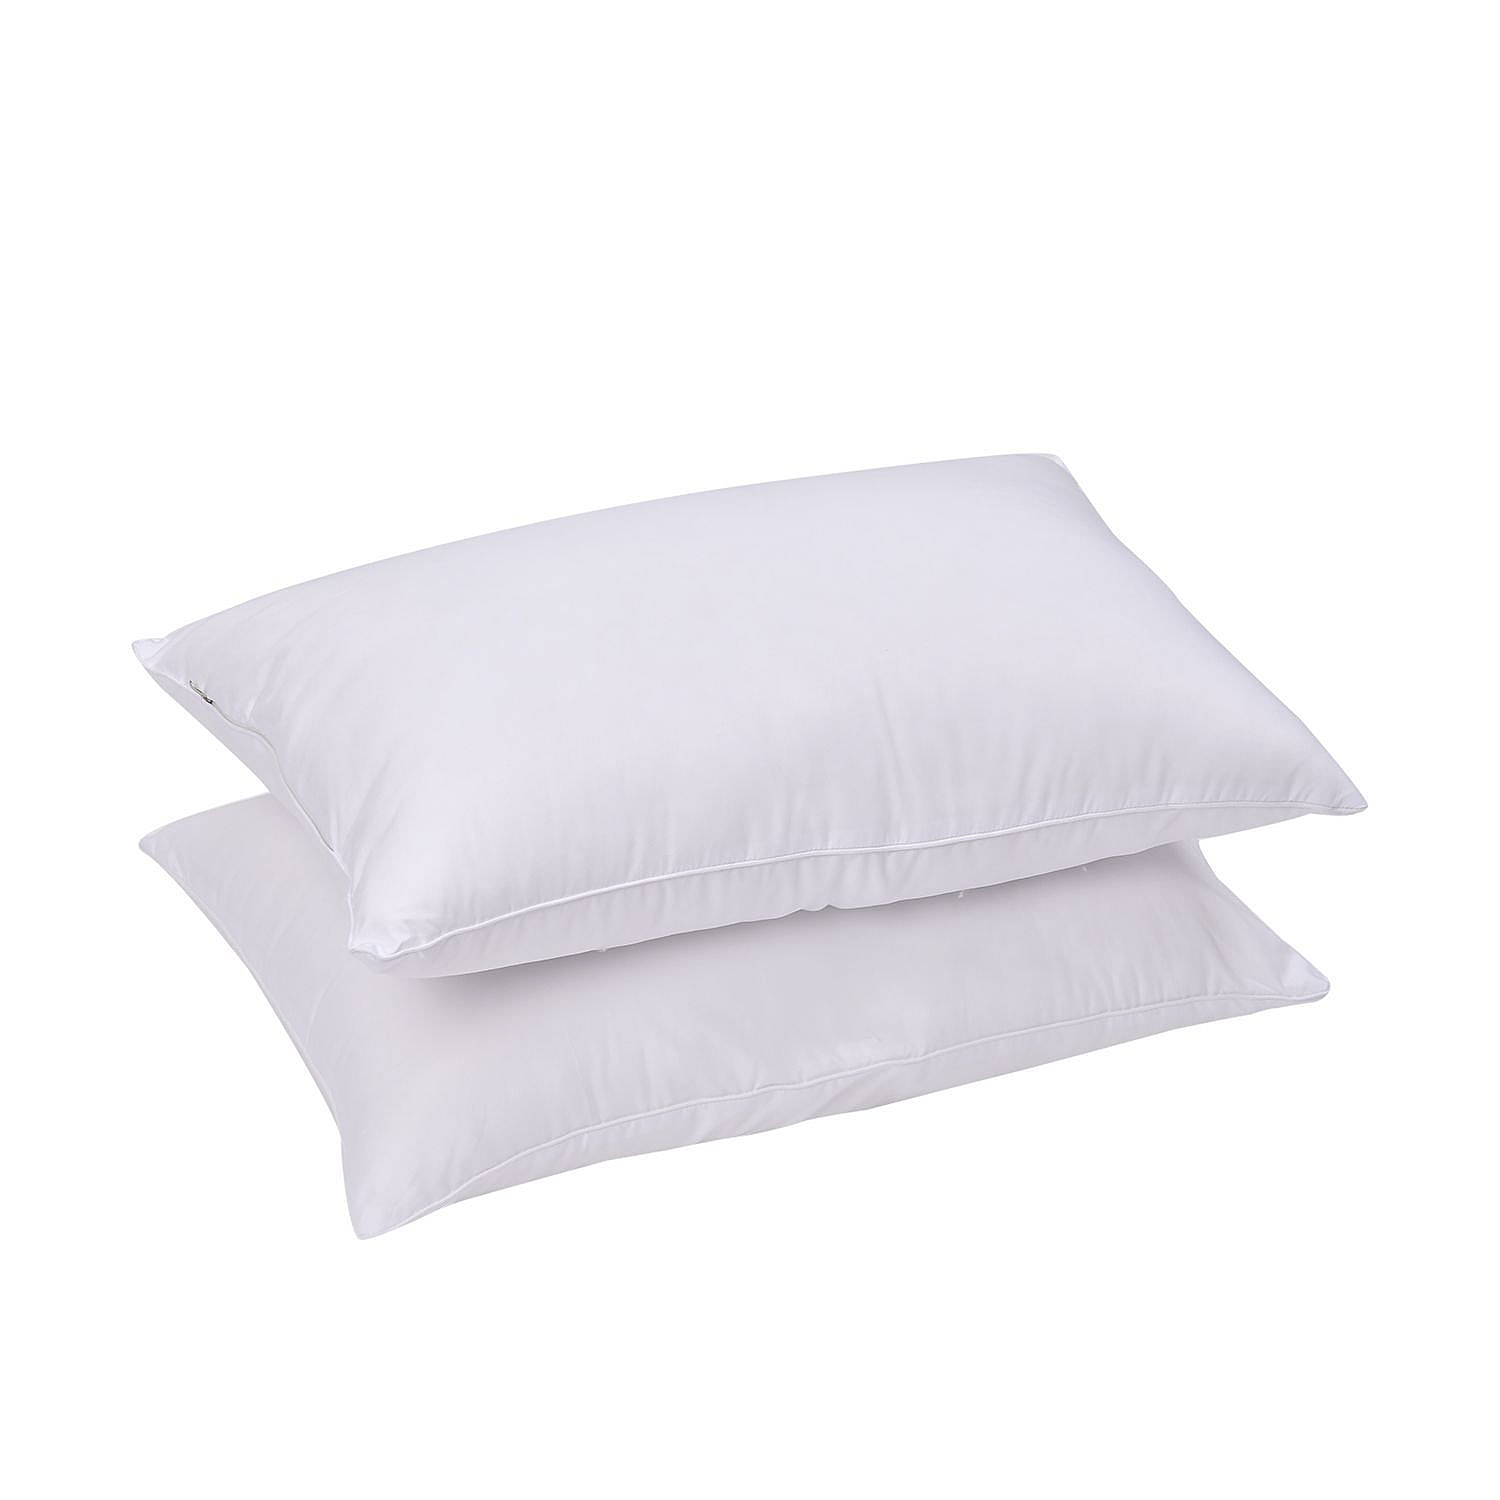 MEGA VALUE DEAL - Set of 2 High Luxe Down Alternative Filled Premium Bounce Back Pillows